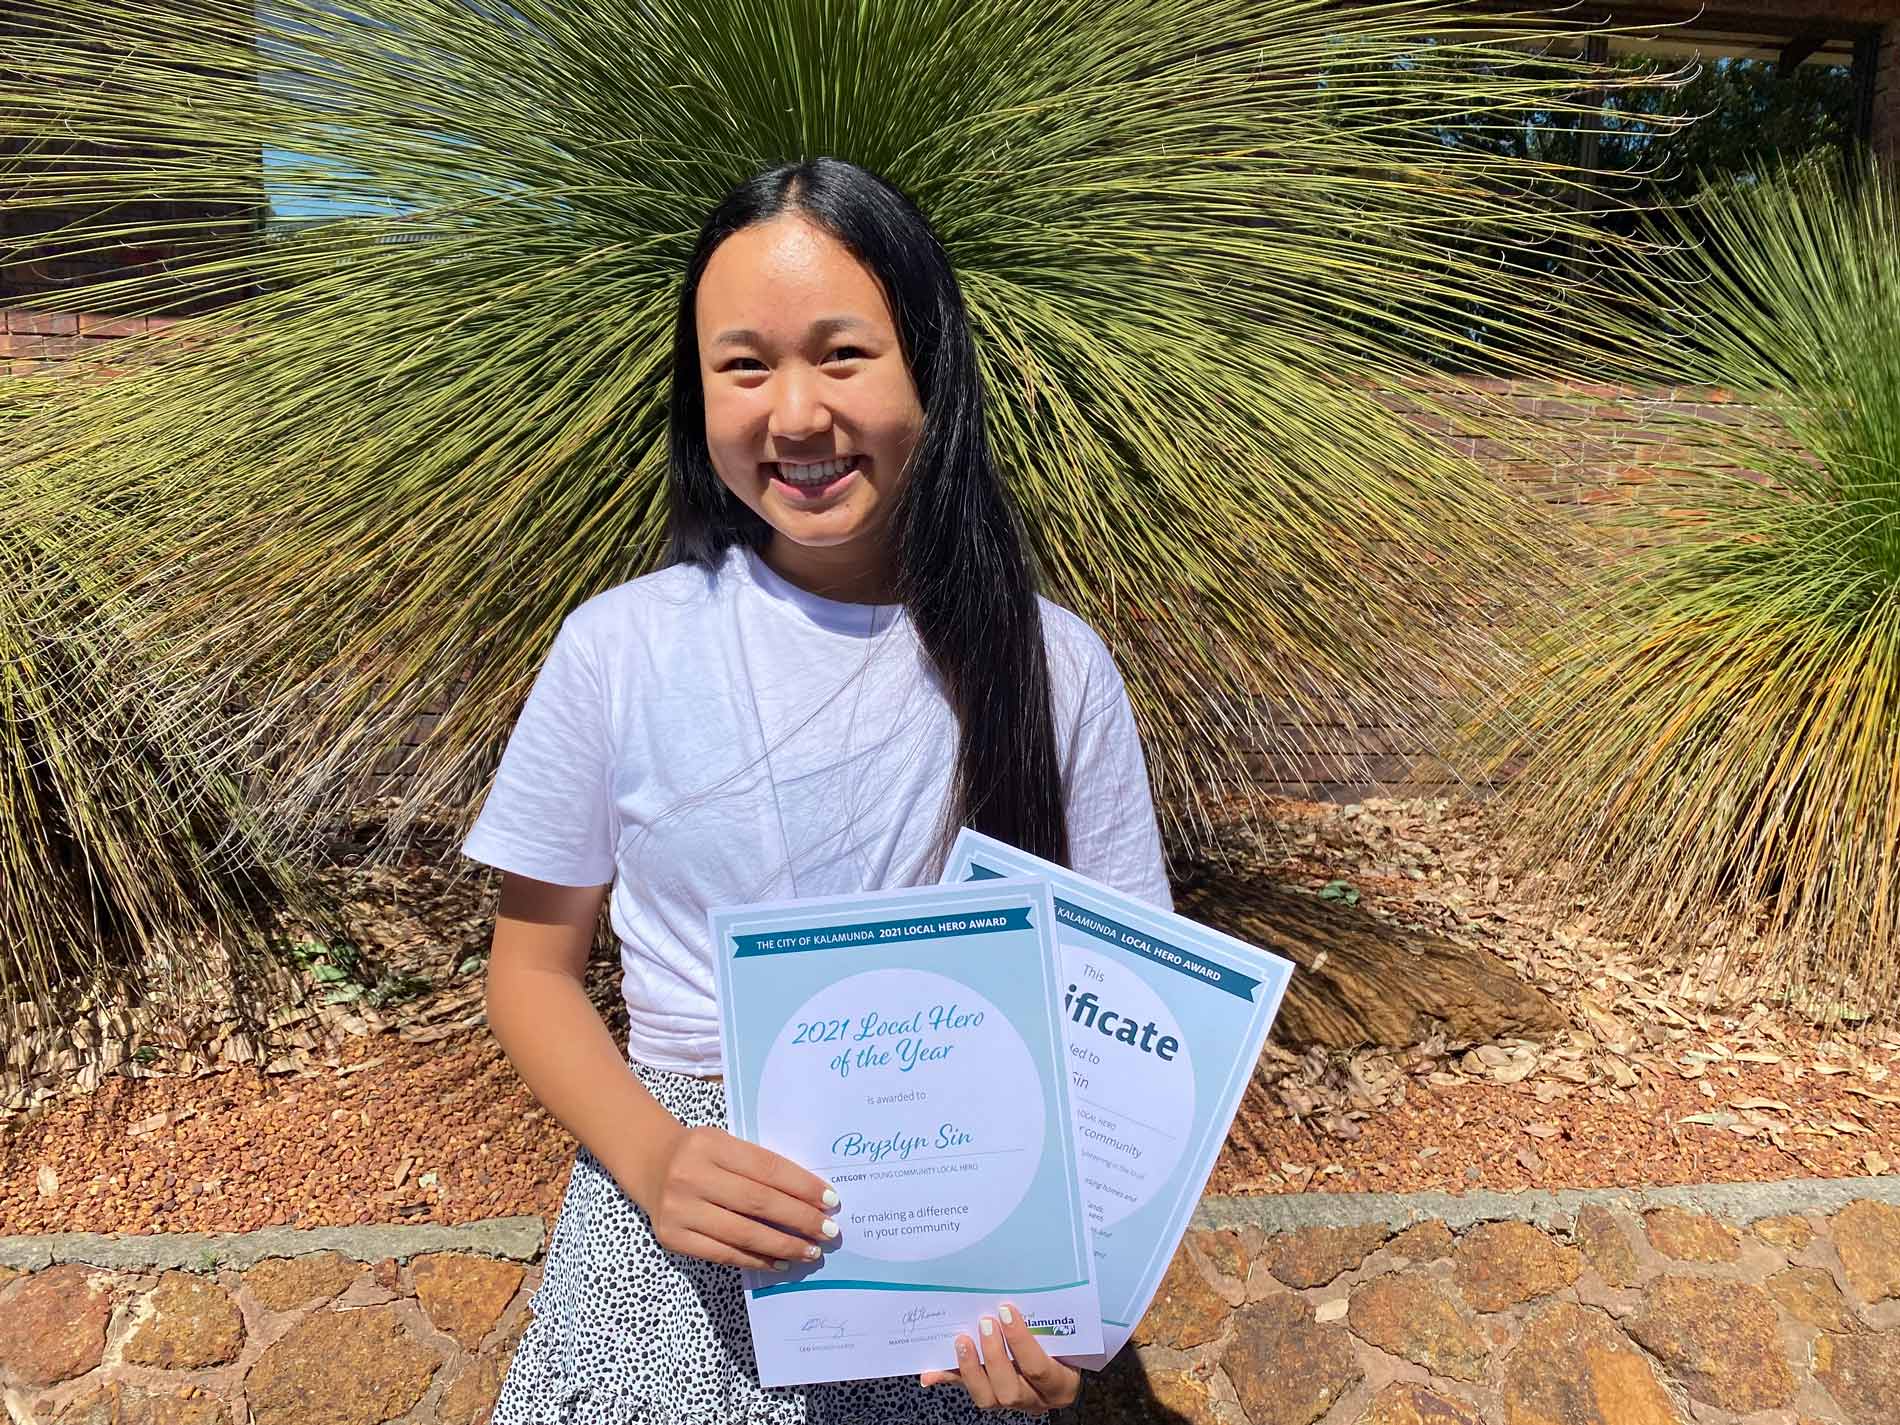 High school student and Forrestfield resident Bryzlyn Sin taking out the 2021 Young Local Hero of the Year award